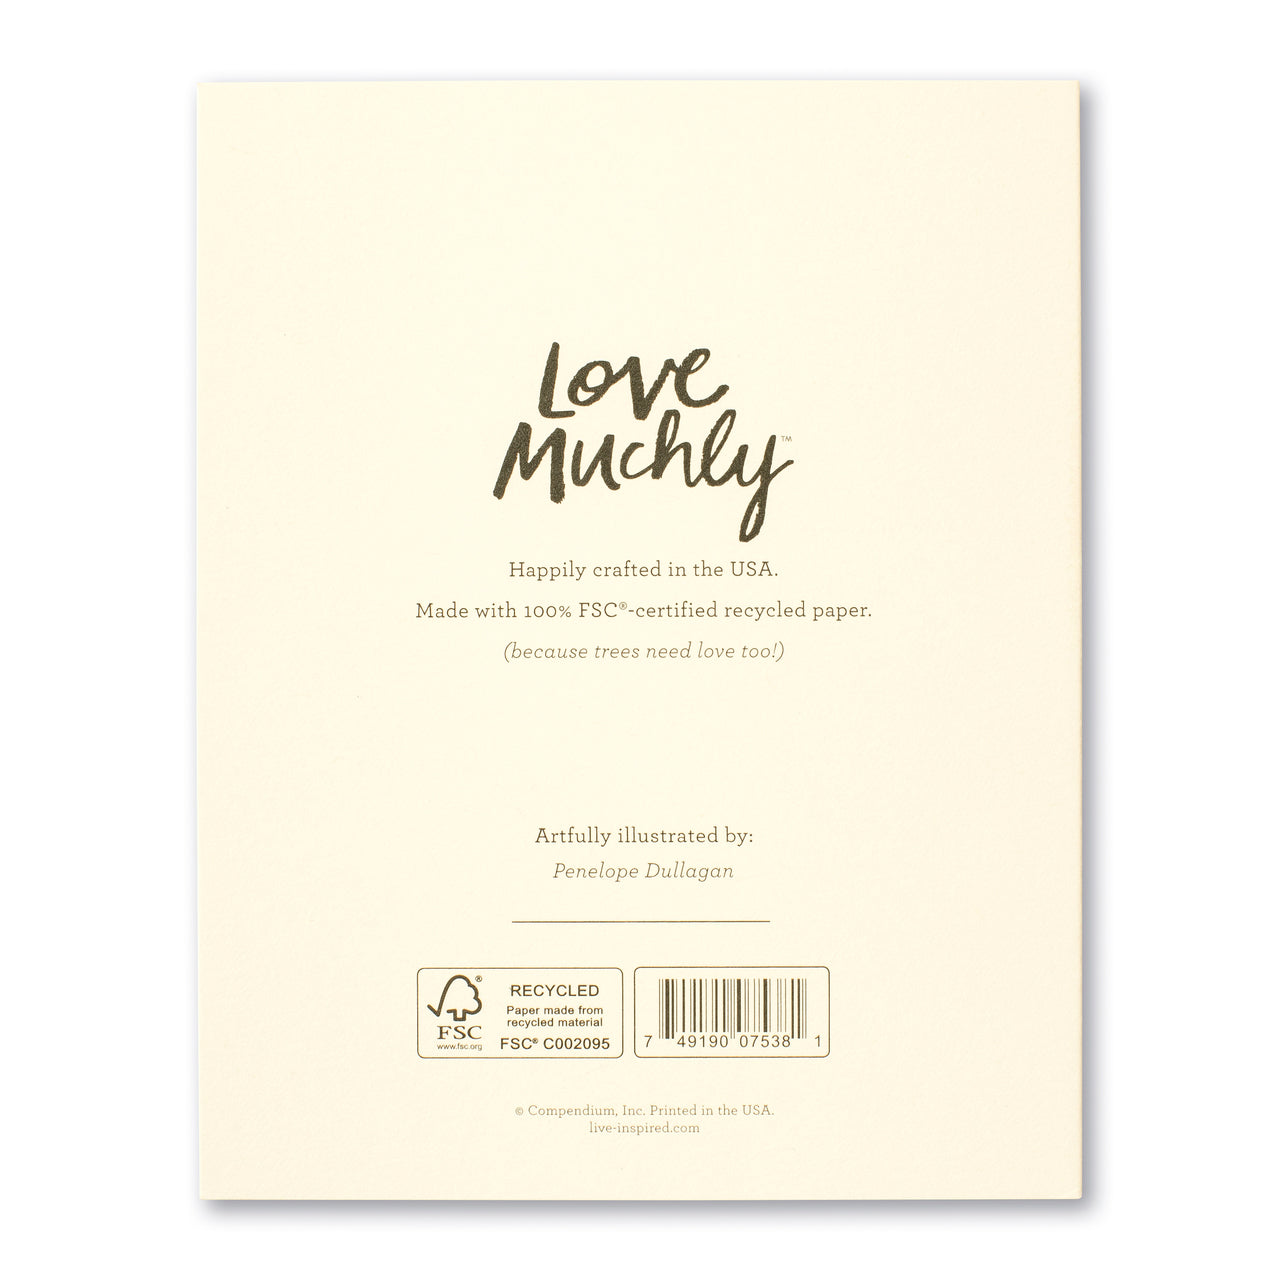 Love Muchly (BA) Baby Card:   A Baby